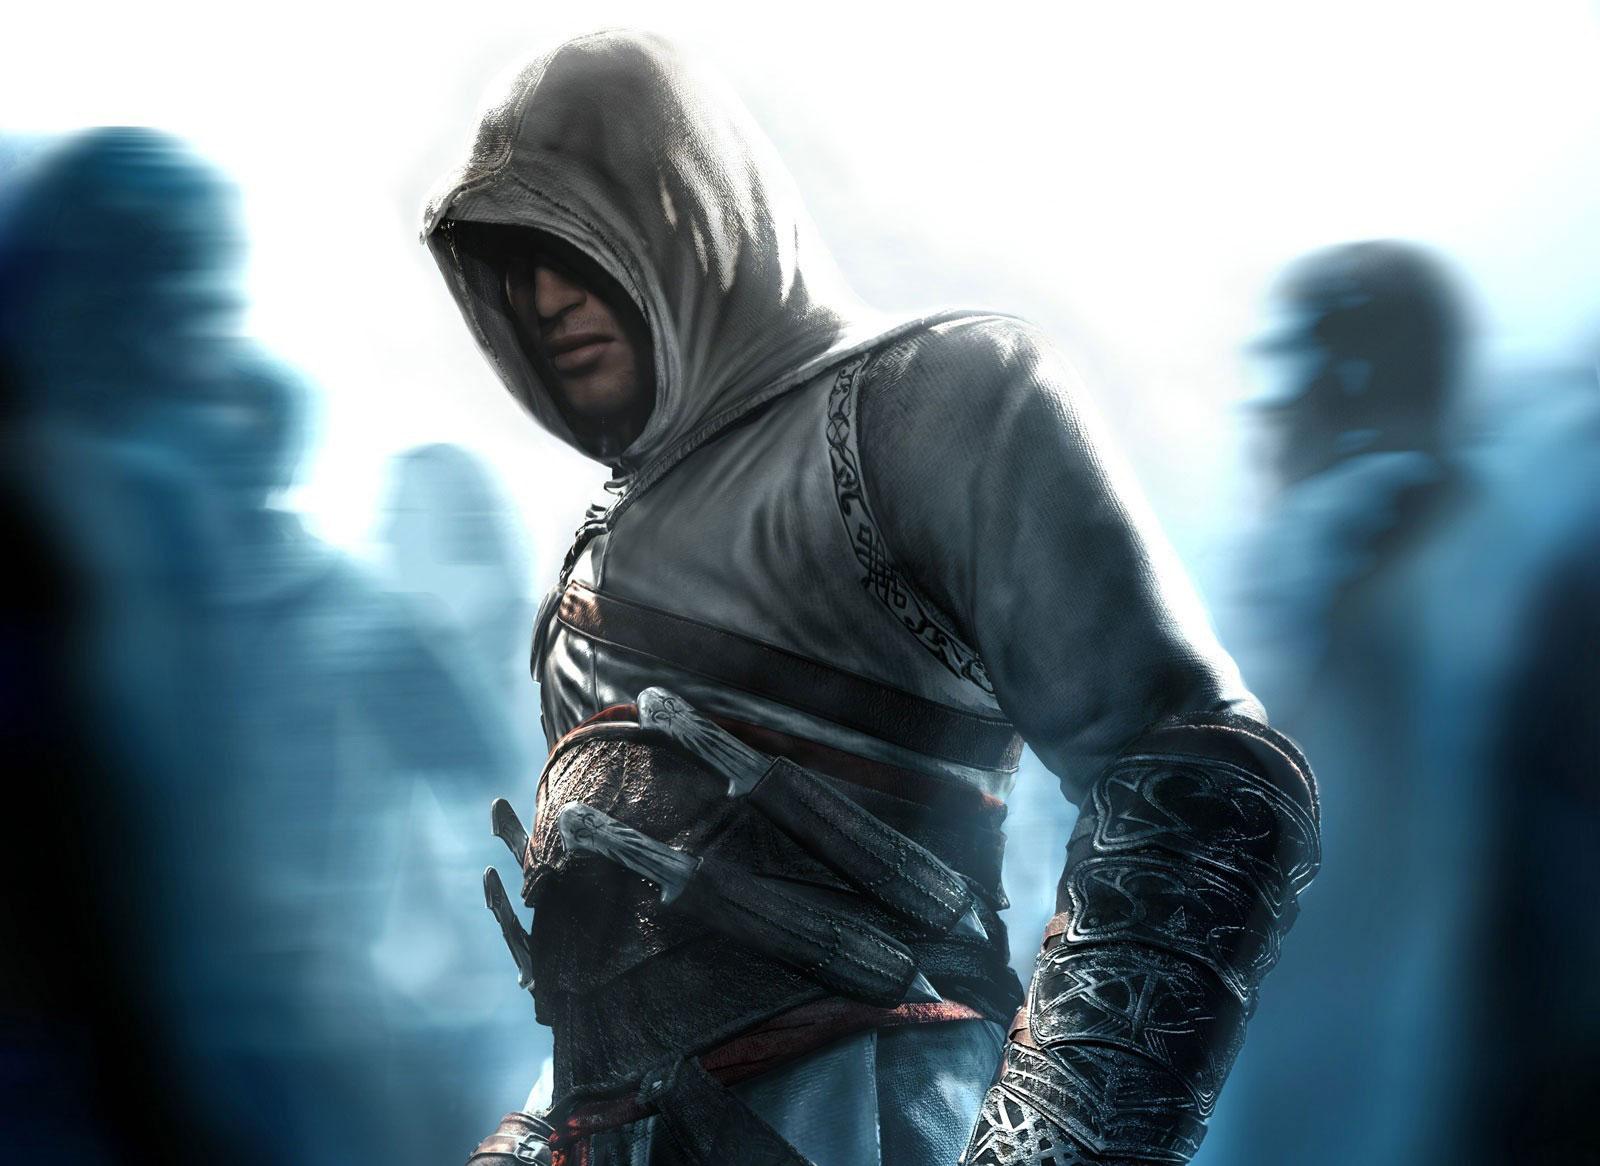 Hollywood s'attaque à Assassin's Creed